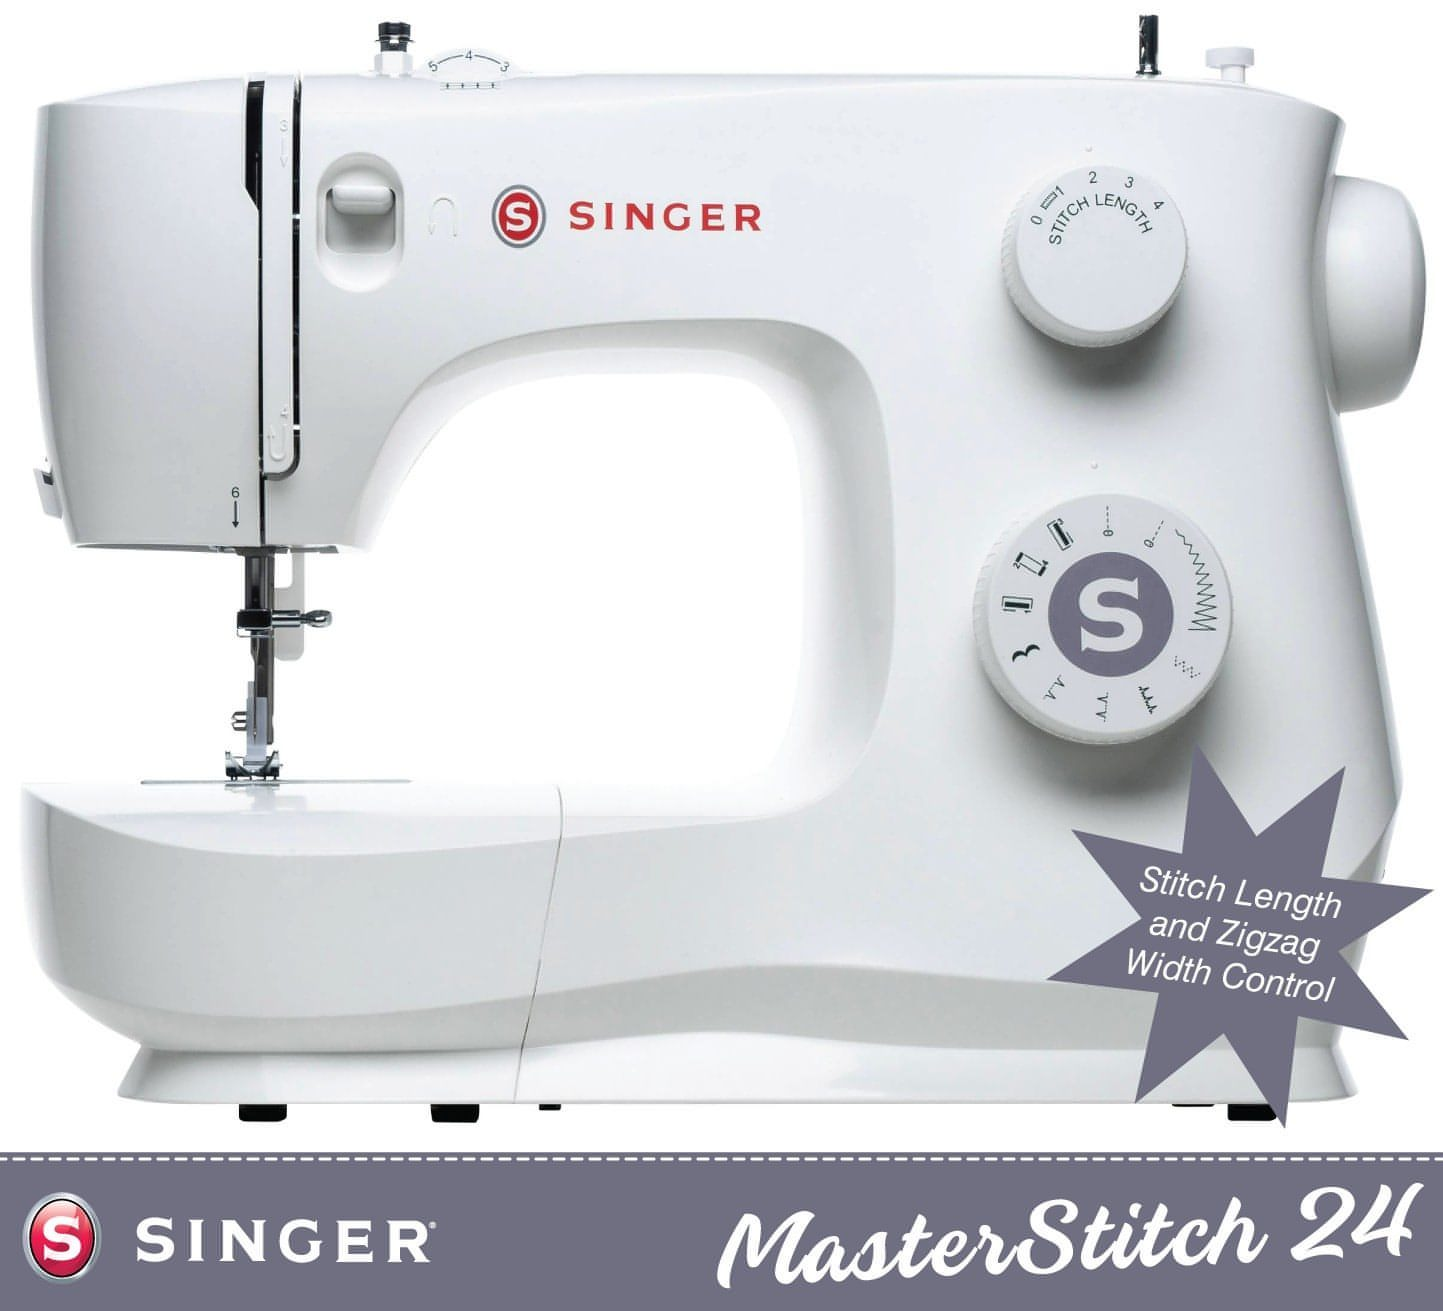 Singer M2405 Sewing Machine - Ideal machine for beginner to intermediate sewists. Used in lots of schools and colleges.